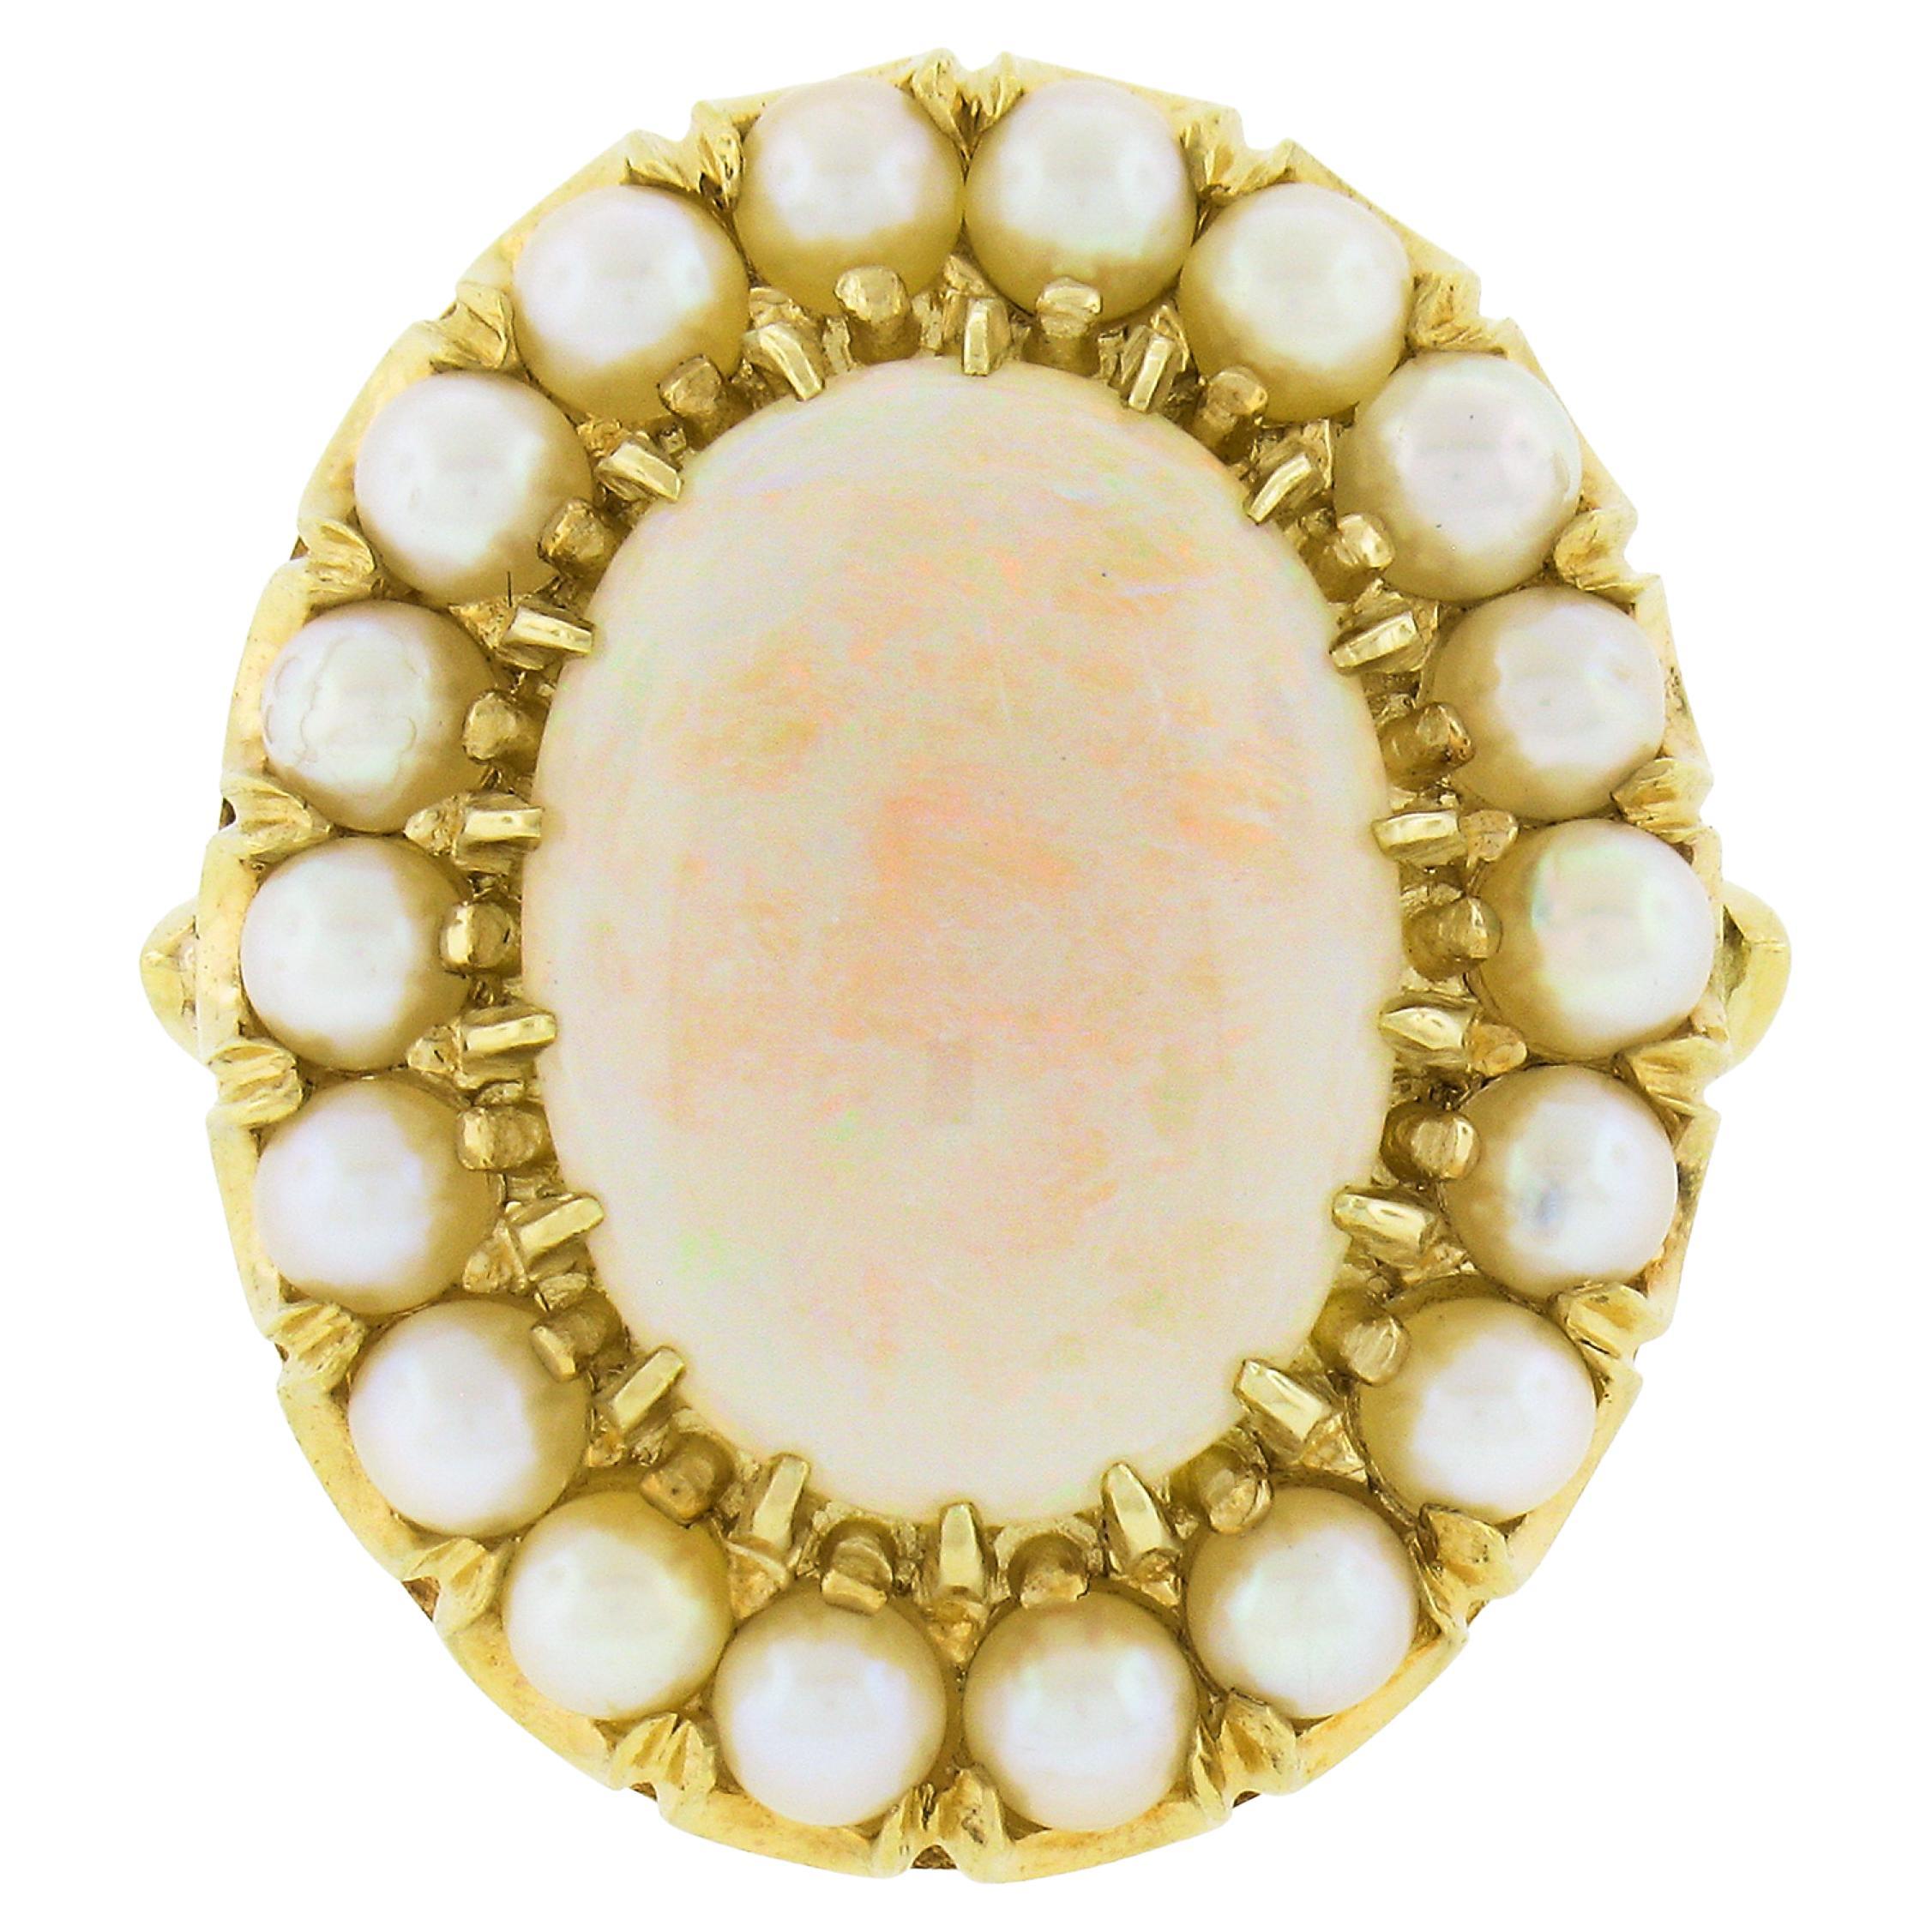 Vintage 14K Yellow Gold Oval Cabochon Opal Solitaire & Pearl Bead Cocktail Ring